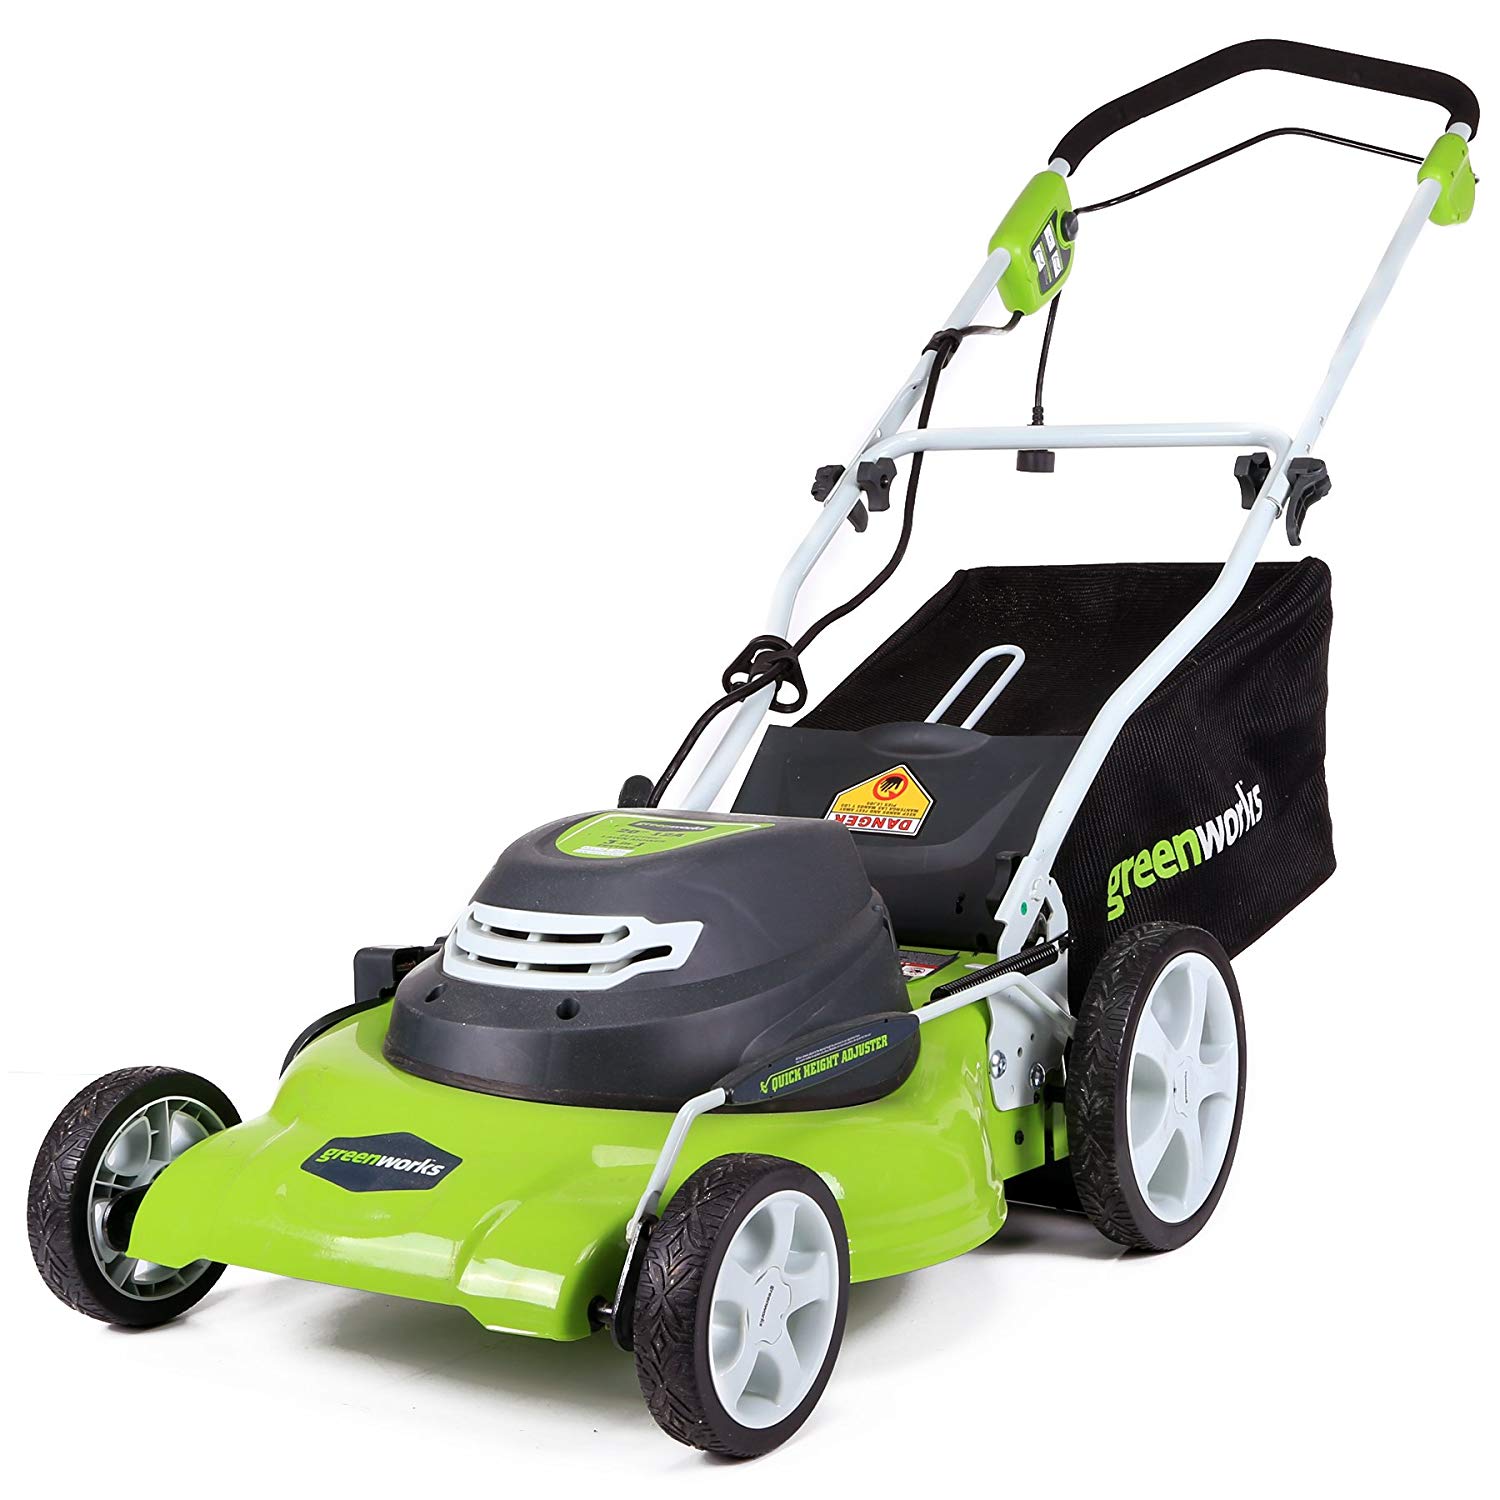 Greenworks 20-Inch 12 Amp Corded Lawn Mower